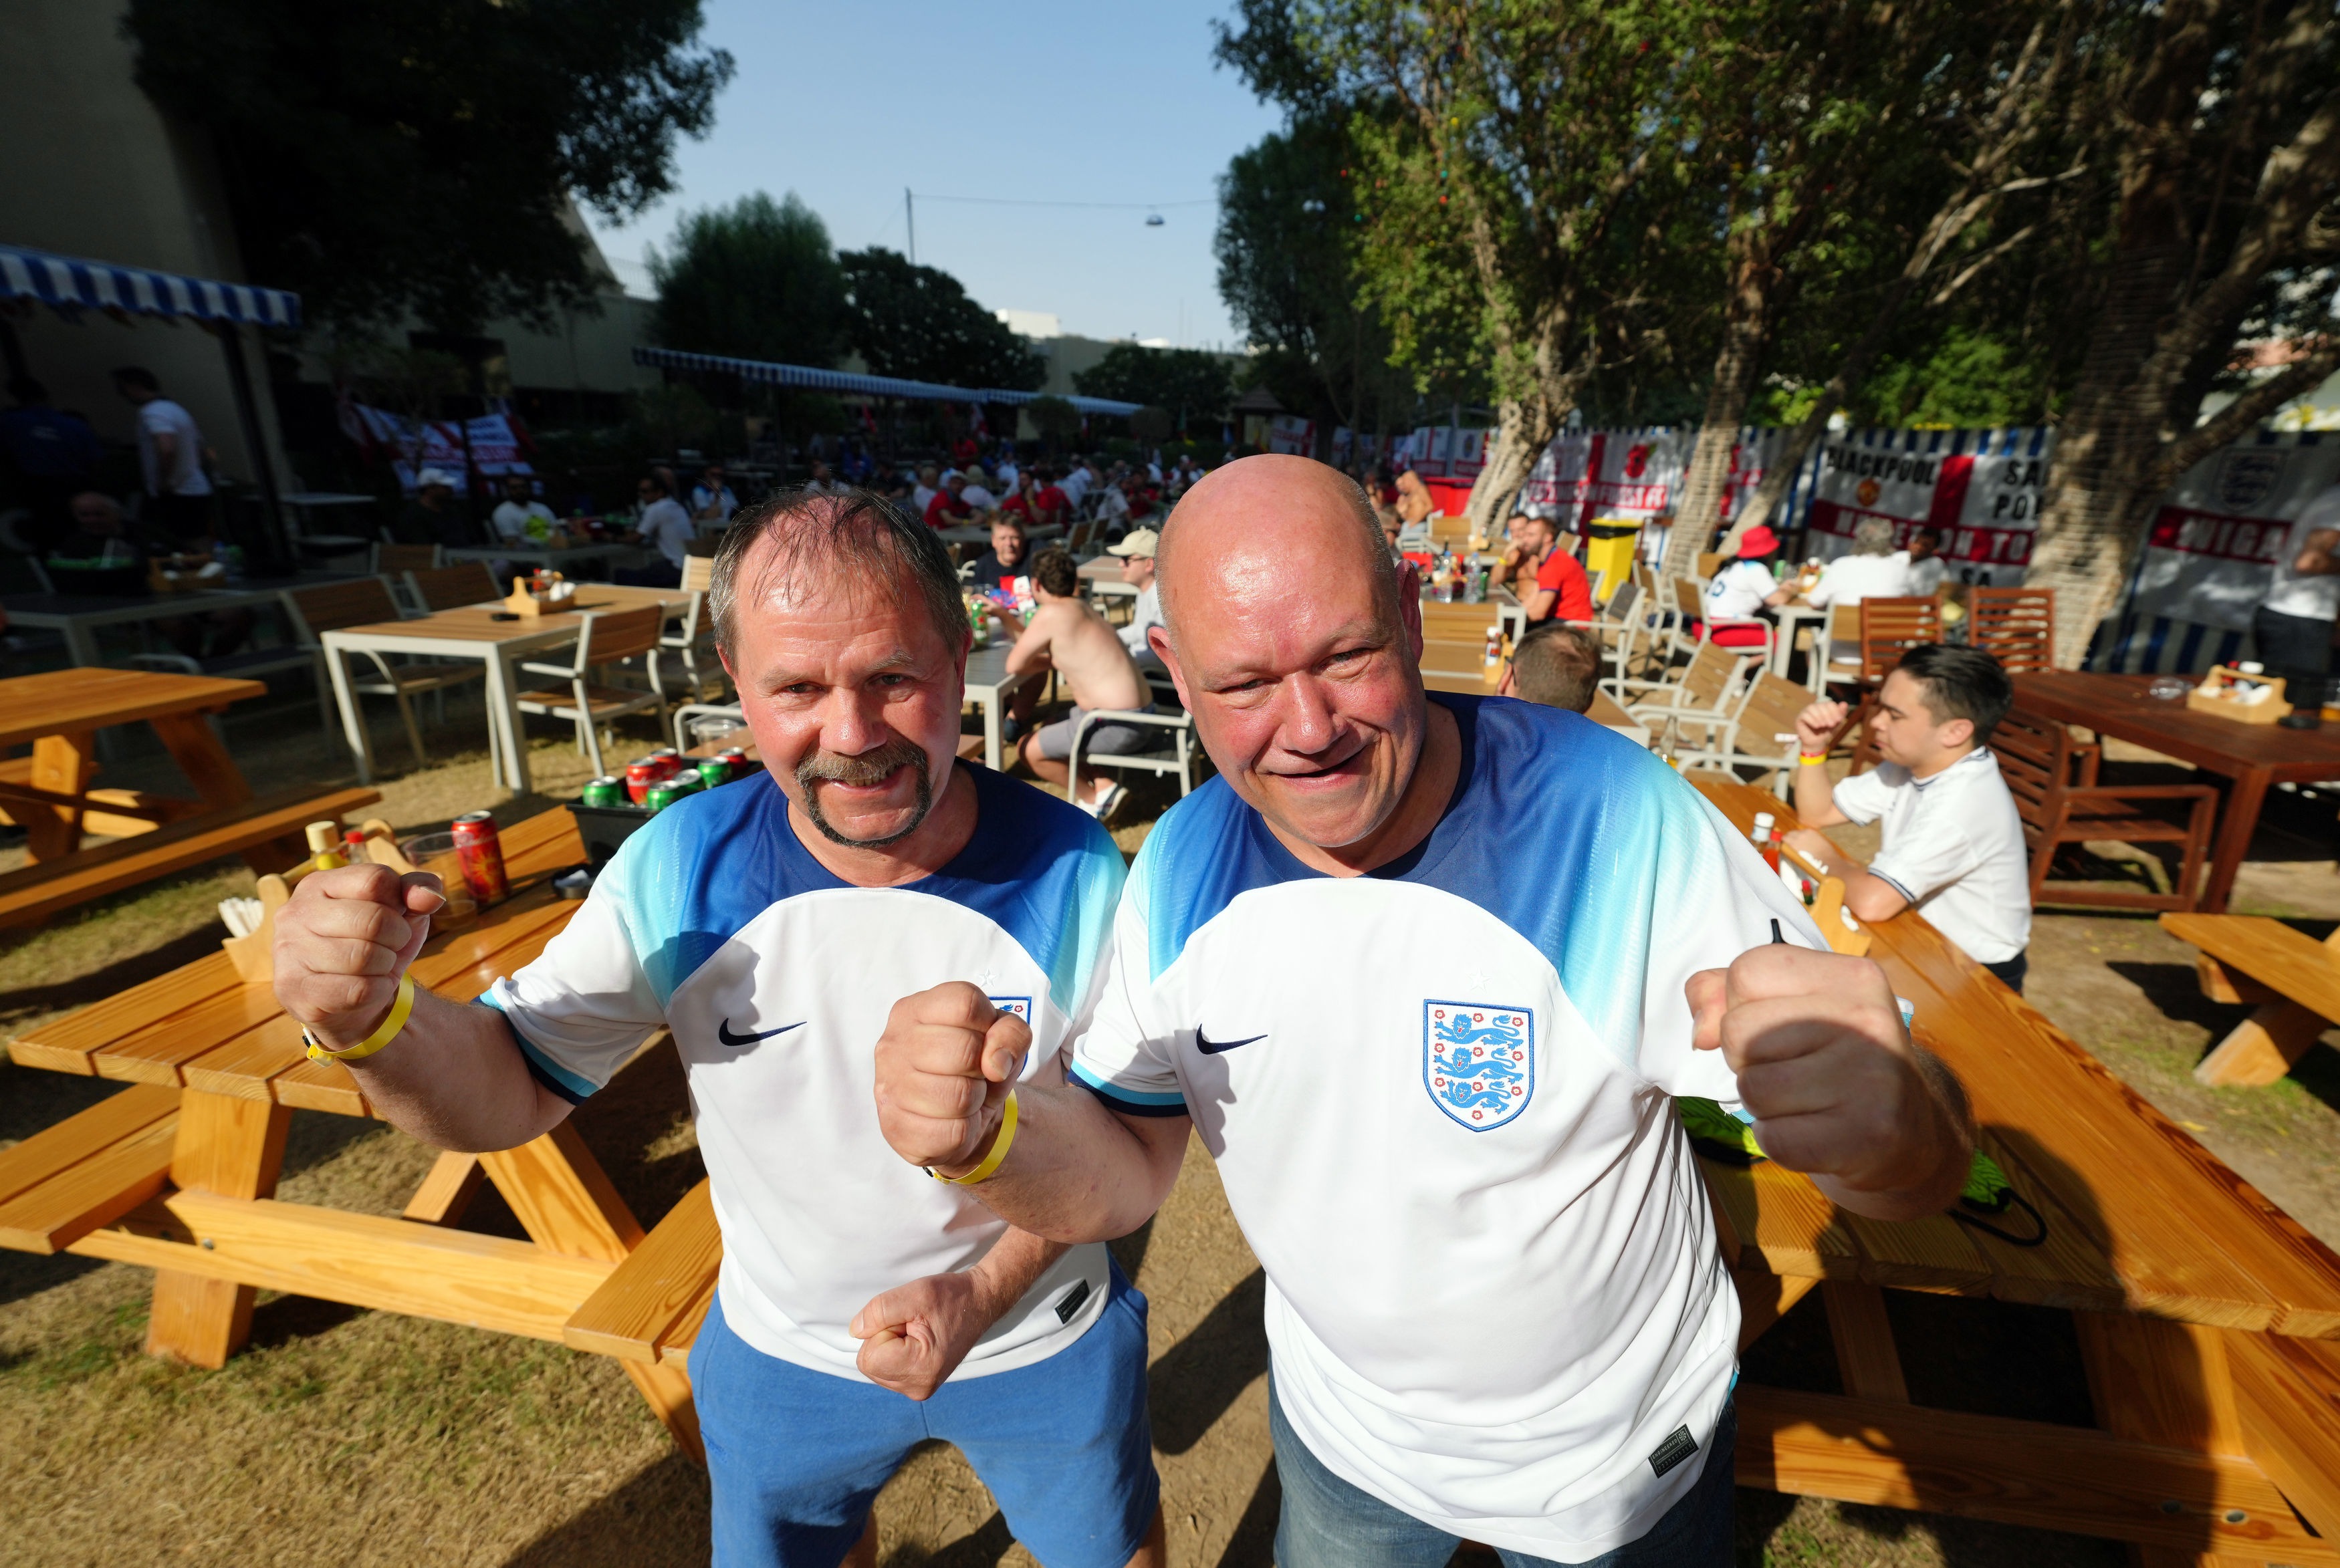 , England fans nurse sore heads after celebrating 3-0 victory against Senegal – as Three Lions head into quarter finals